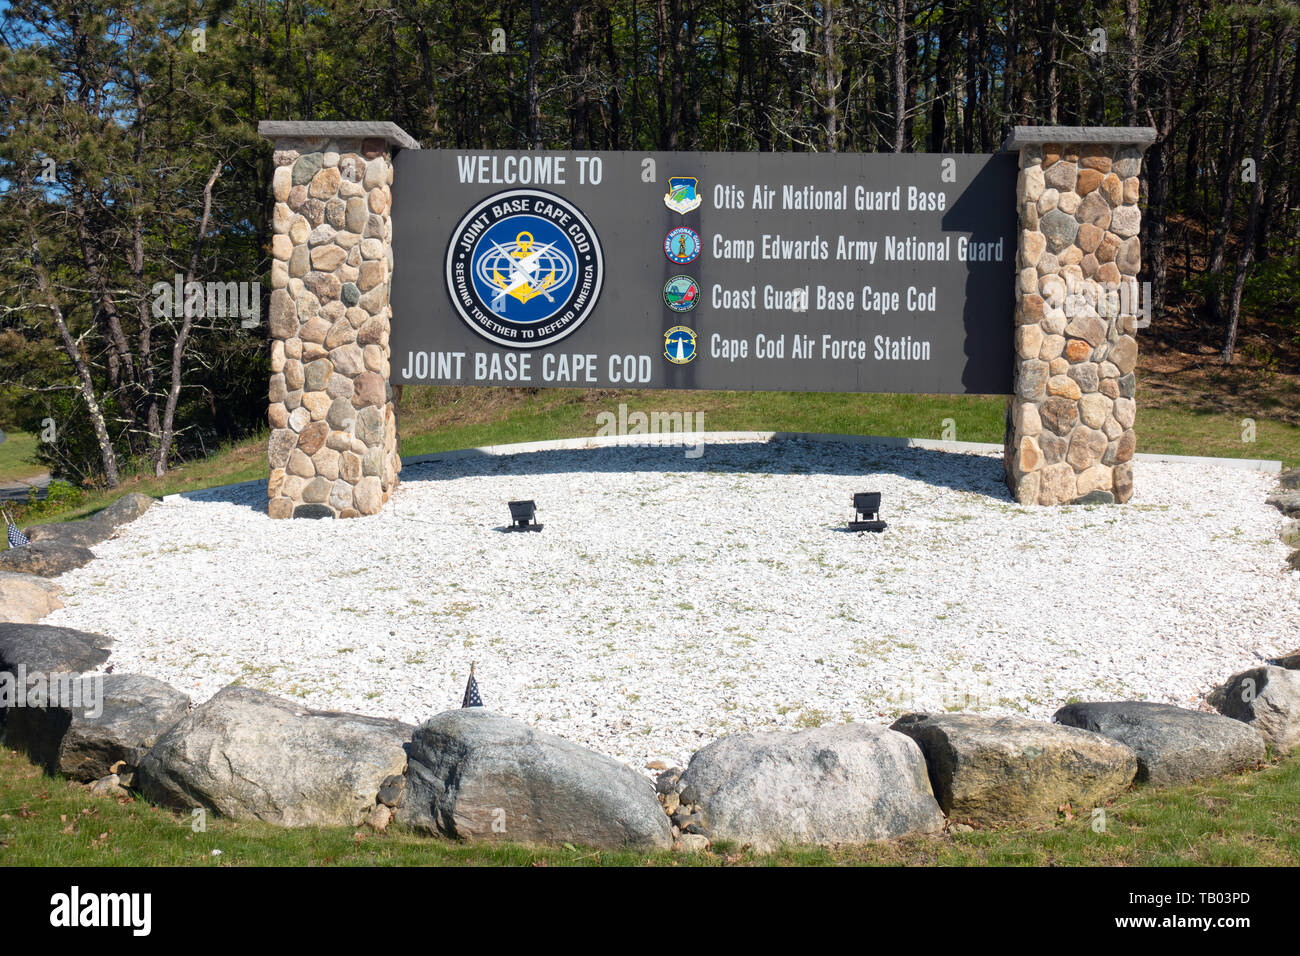 Welcome to Joint Base Cape Cod sign with Otis Air National Guard Base, Camp Edwards Army National Guard, Coast Guard & Cape Cod Air Force Station Stock Photo